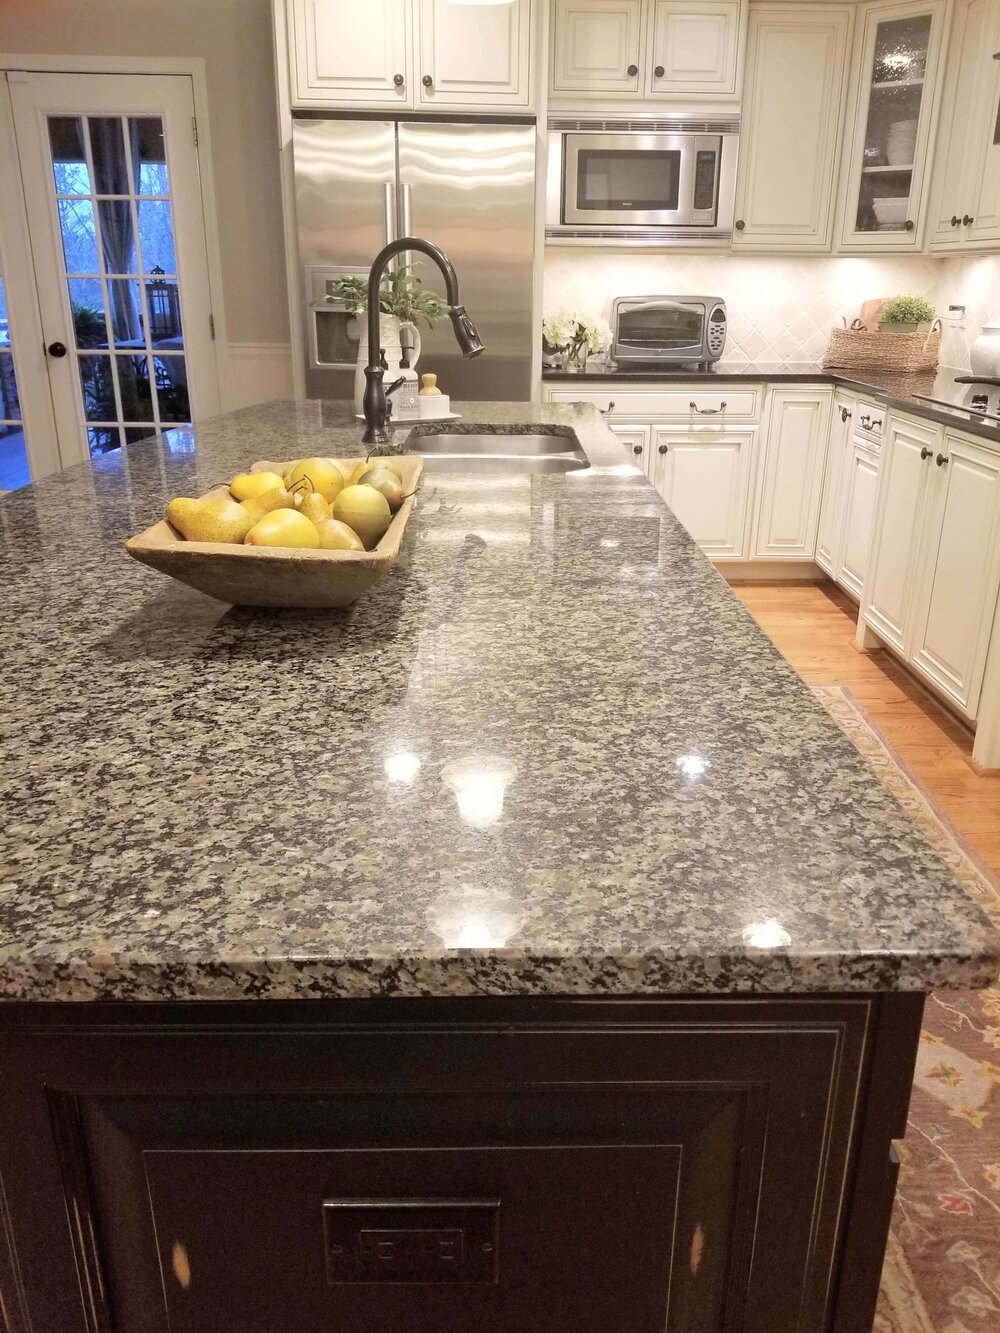 BEFORE REMODEL - Spotty granite on the island was busy and dated. Black granite is on the perimeter cabinets.